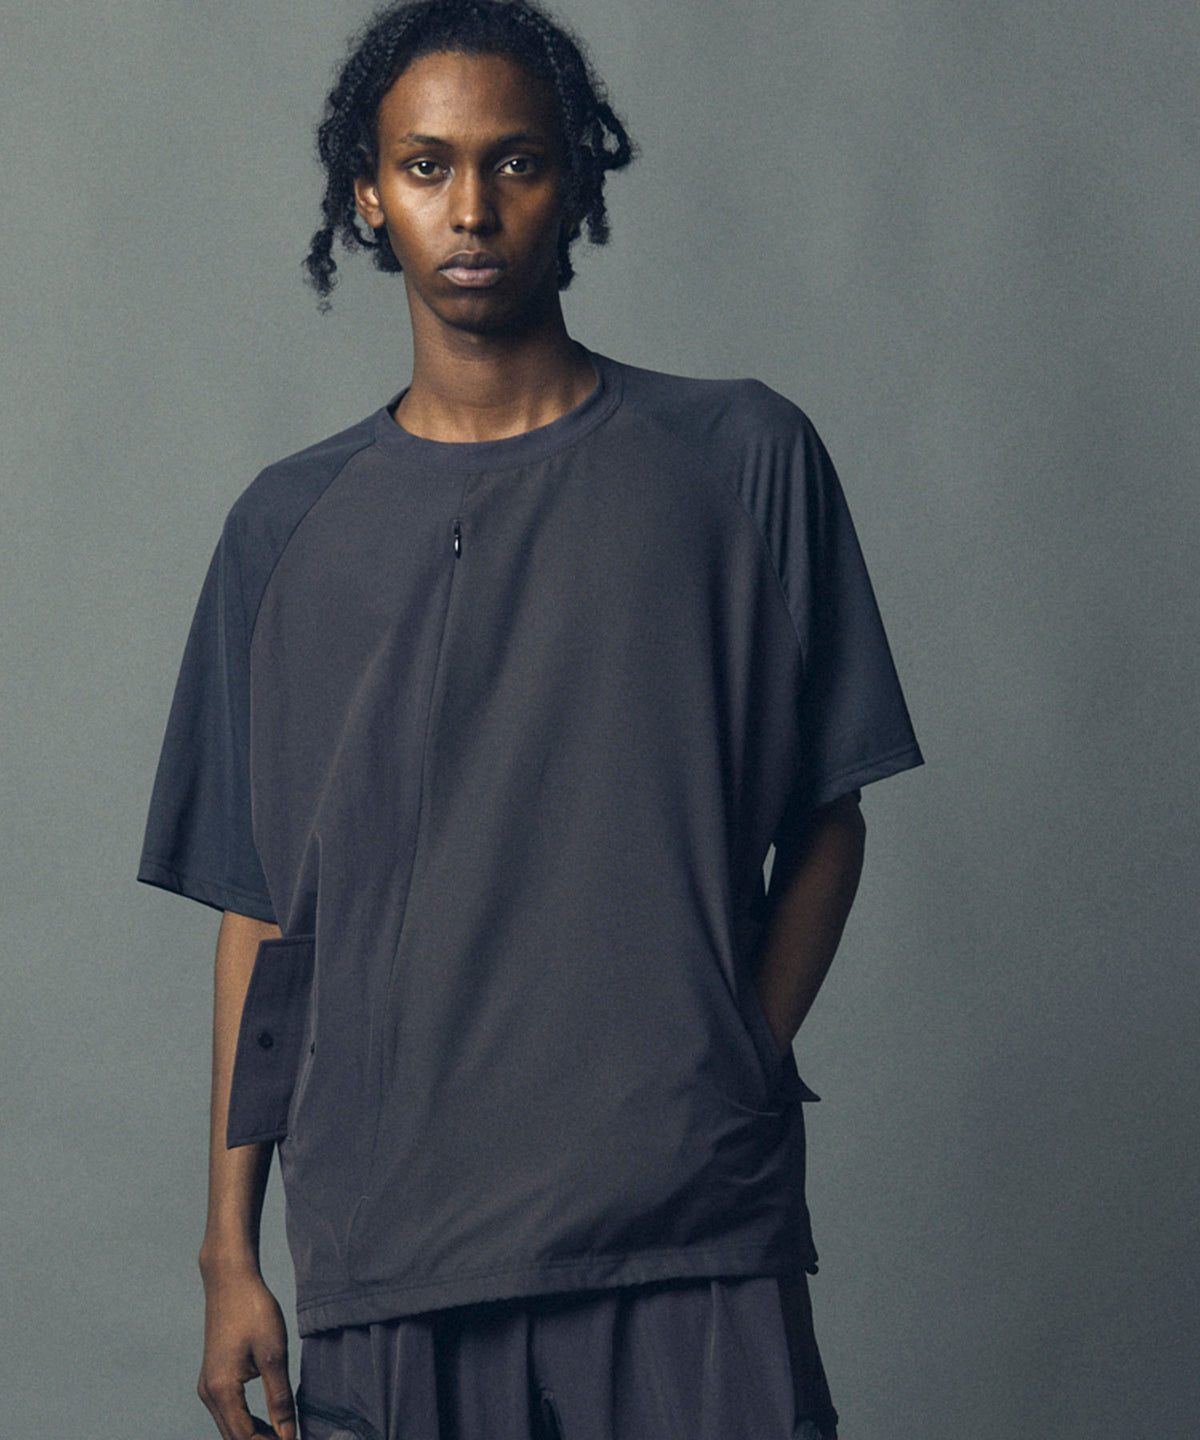 【SPORTS TECH HIGH SPEC LINE】Oversized Different Material Combination Crew Neck Pocket T-shirt